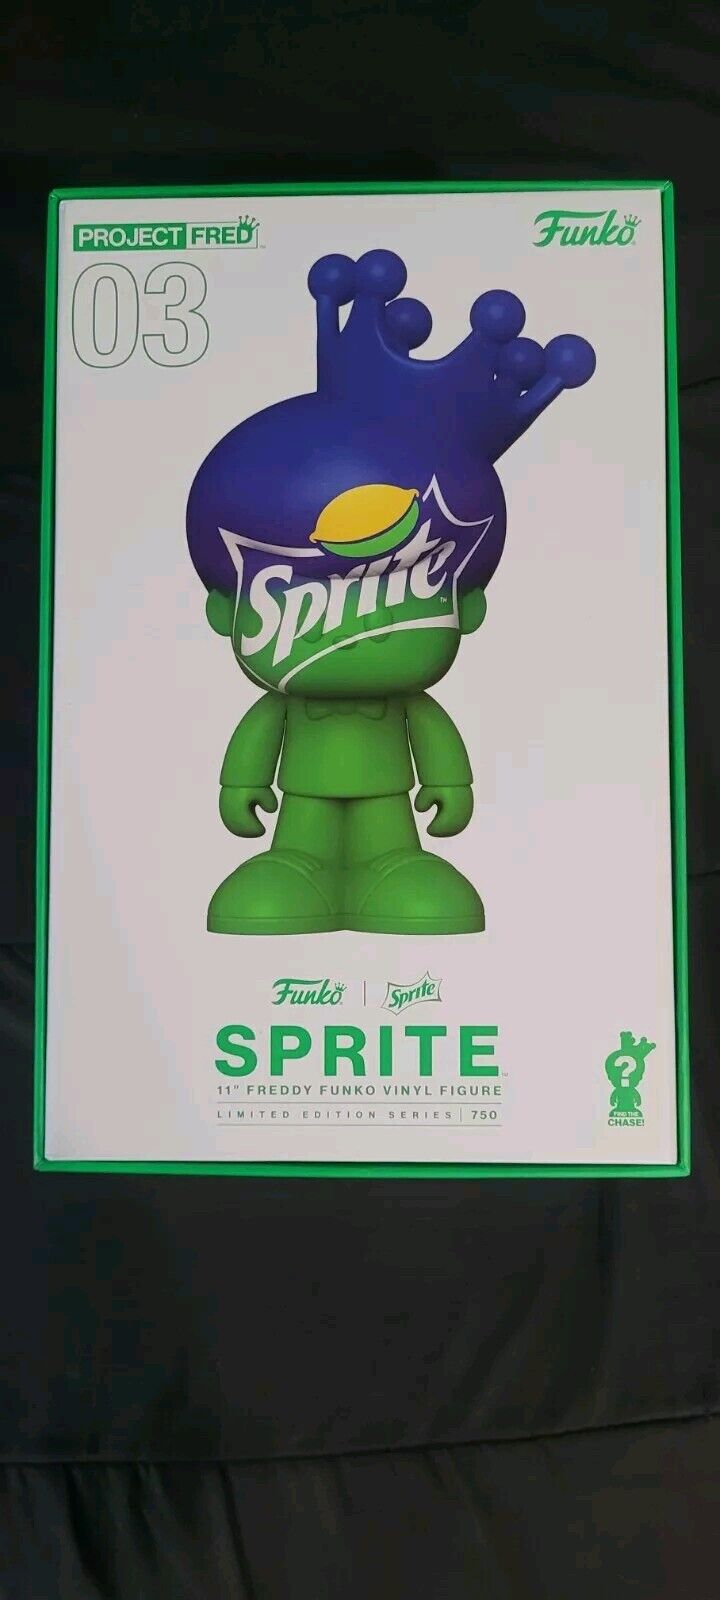 Sprite Edition of Project Fred 03 - 11\